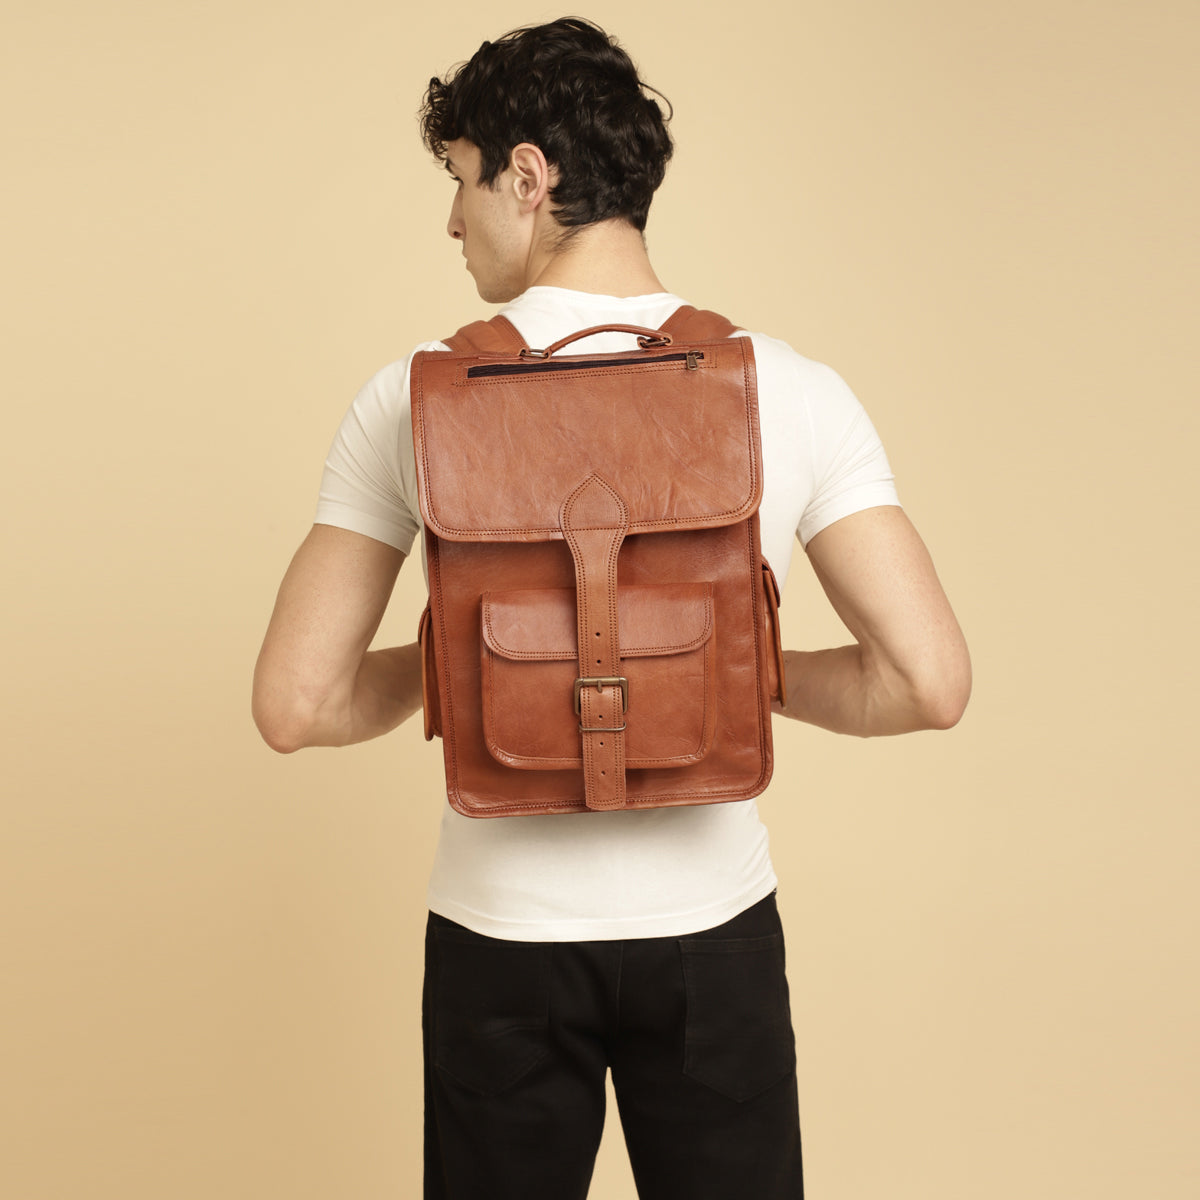 Justanned Leather Backpack Bag